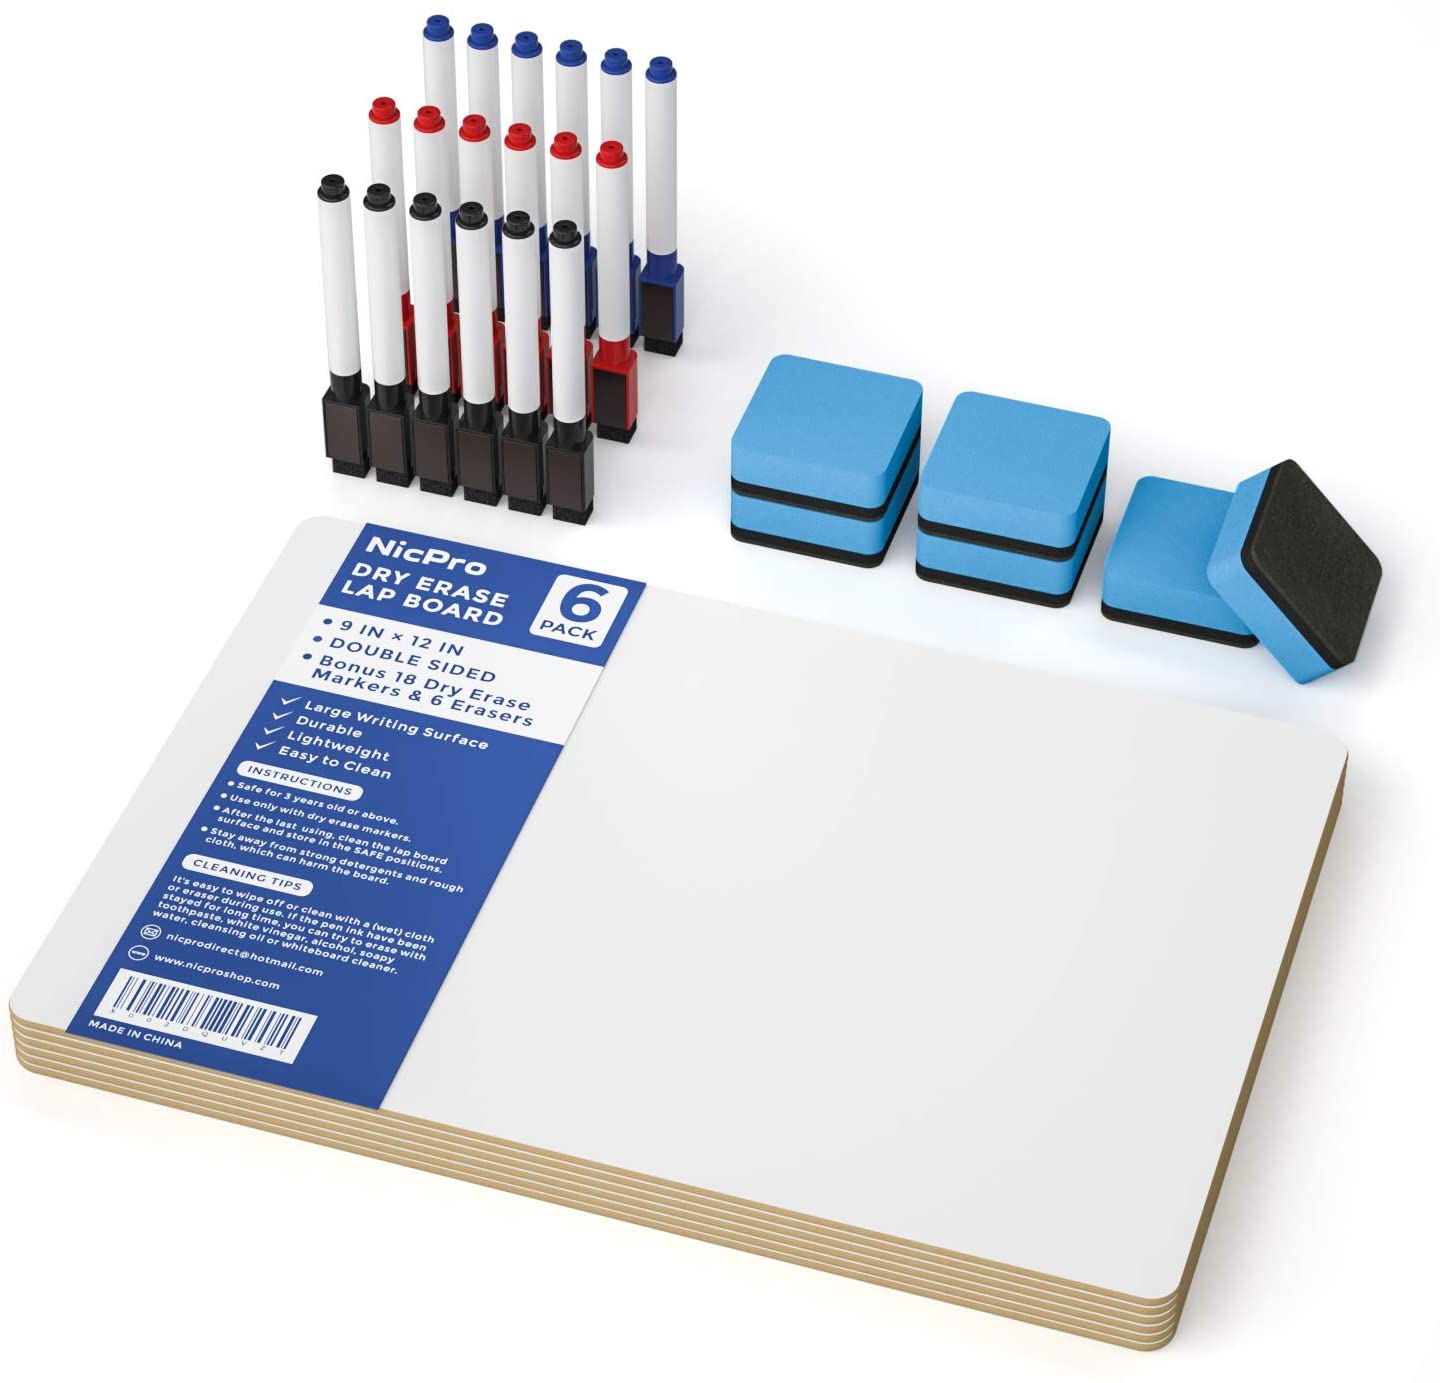 Double Sided Dry Erase Small White Board for Desk (Pack of 12) - 9x12 Inch  Small Dry